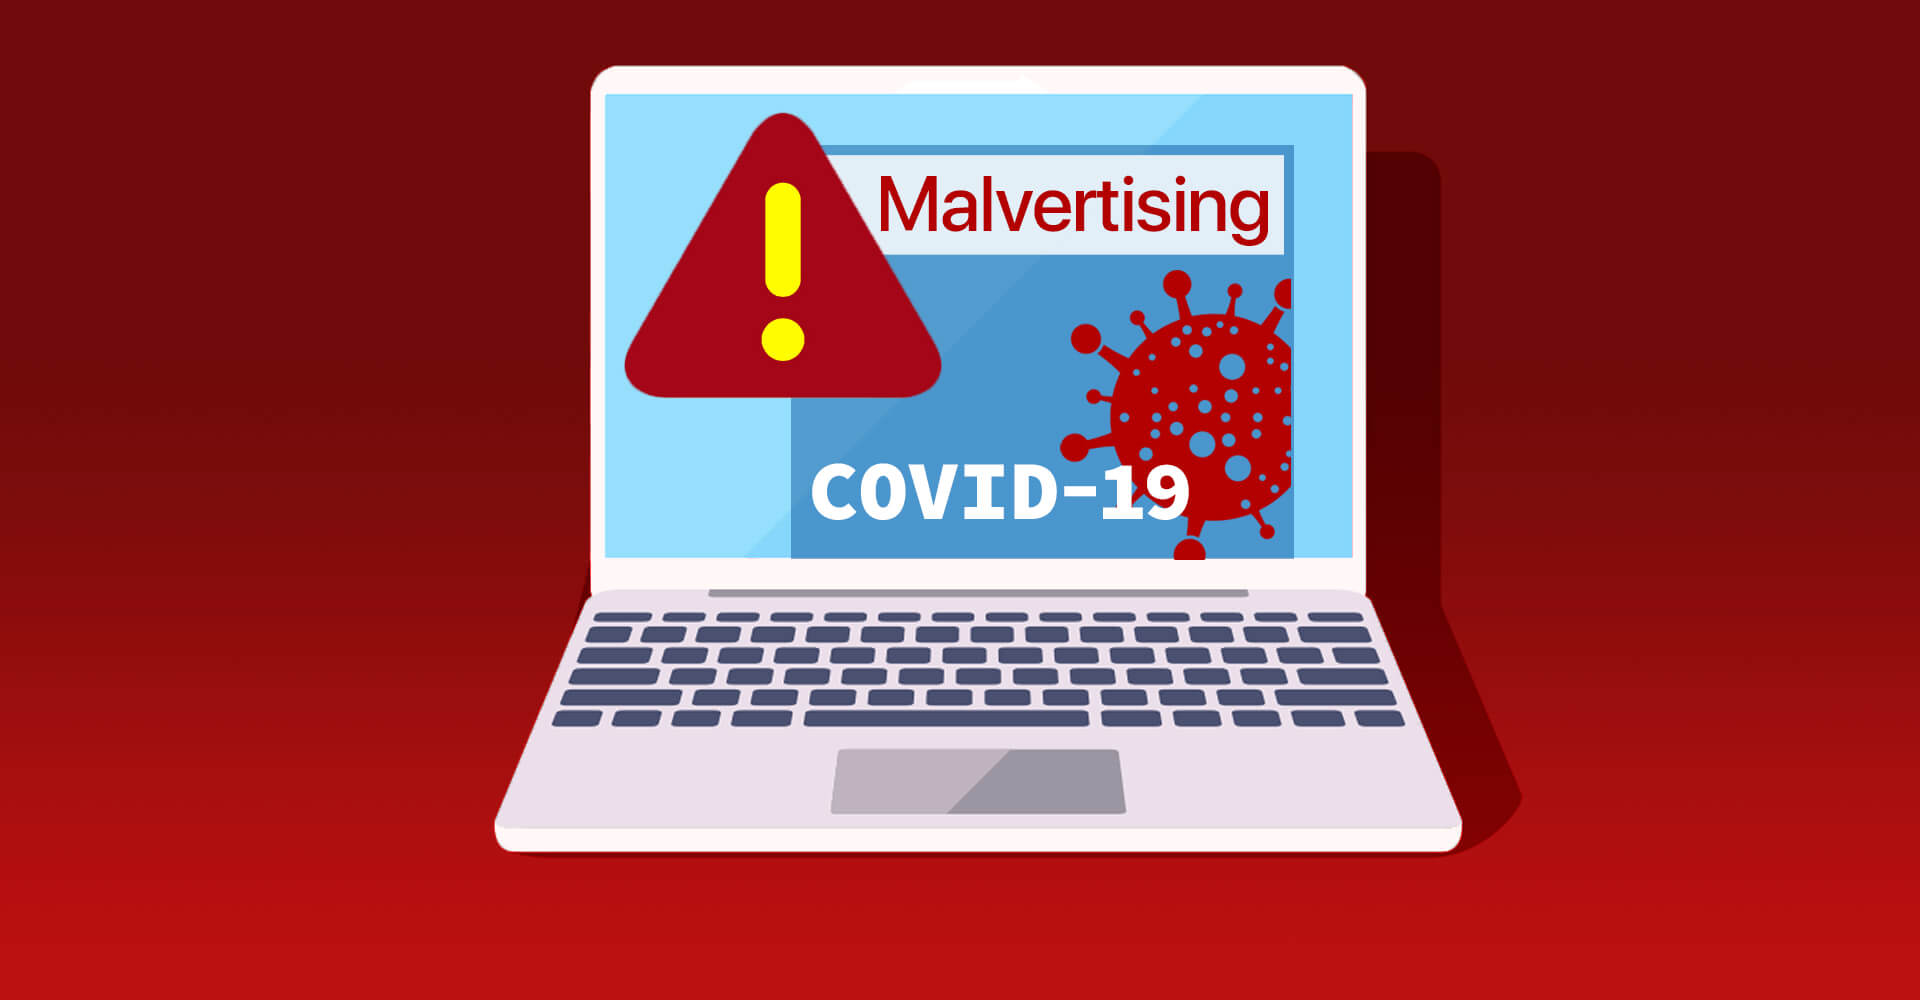 Avast researchers detect a September surge in malvertising